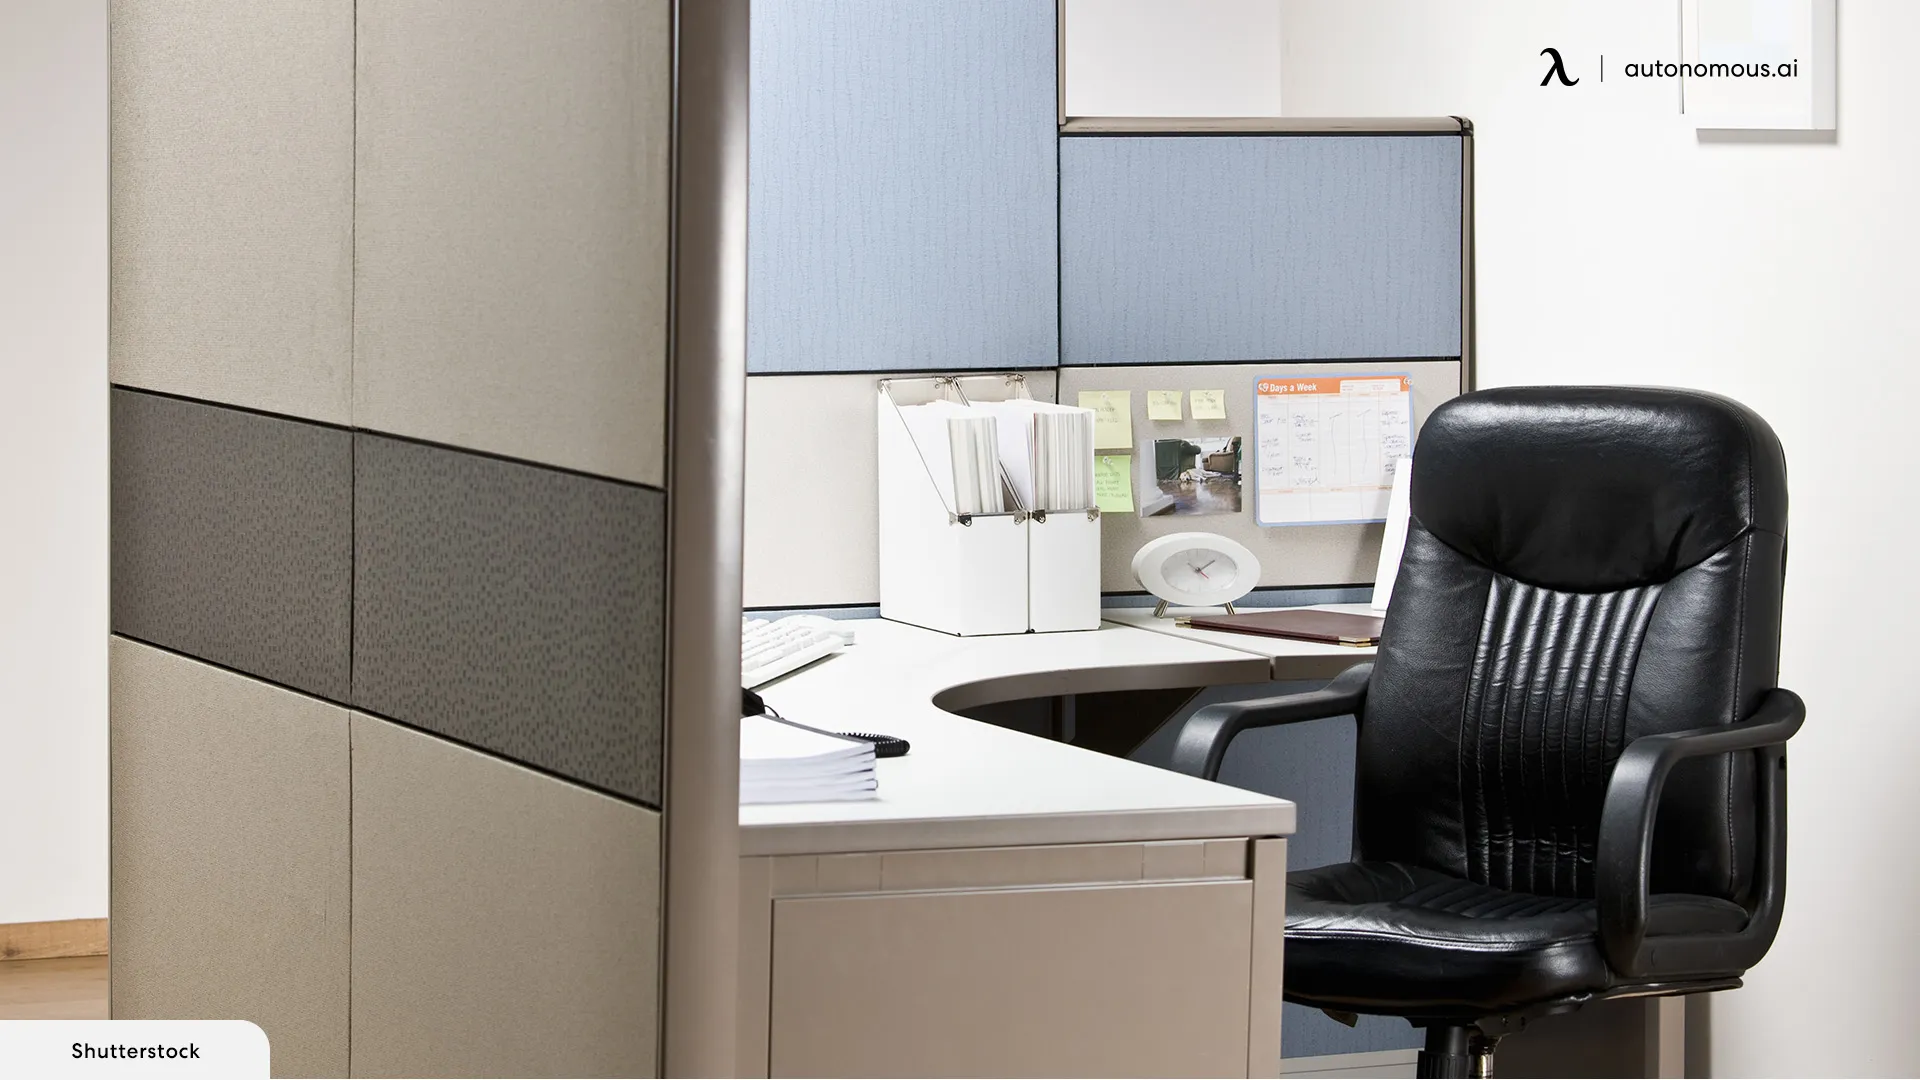 Minimalist - how to decorate my office cubicle